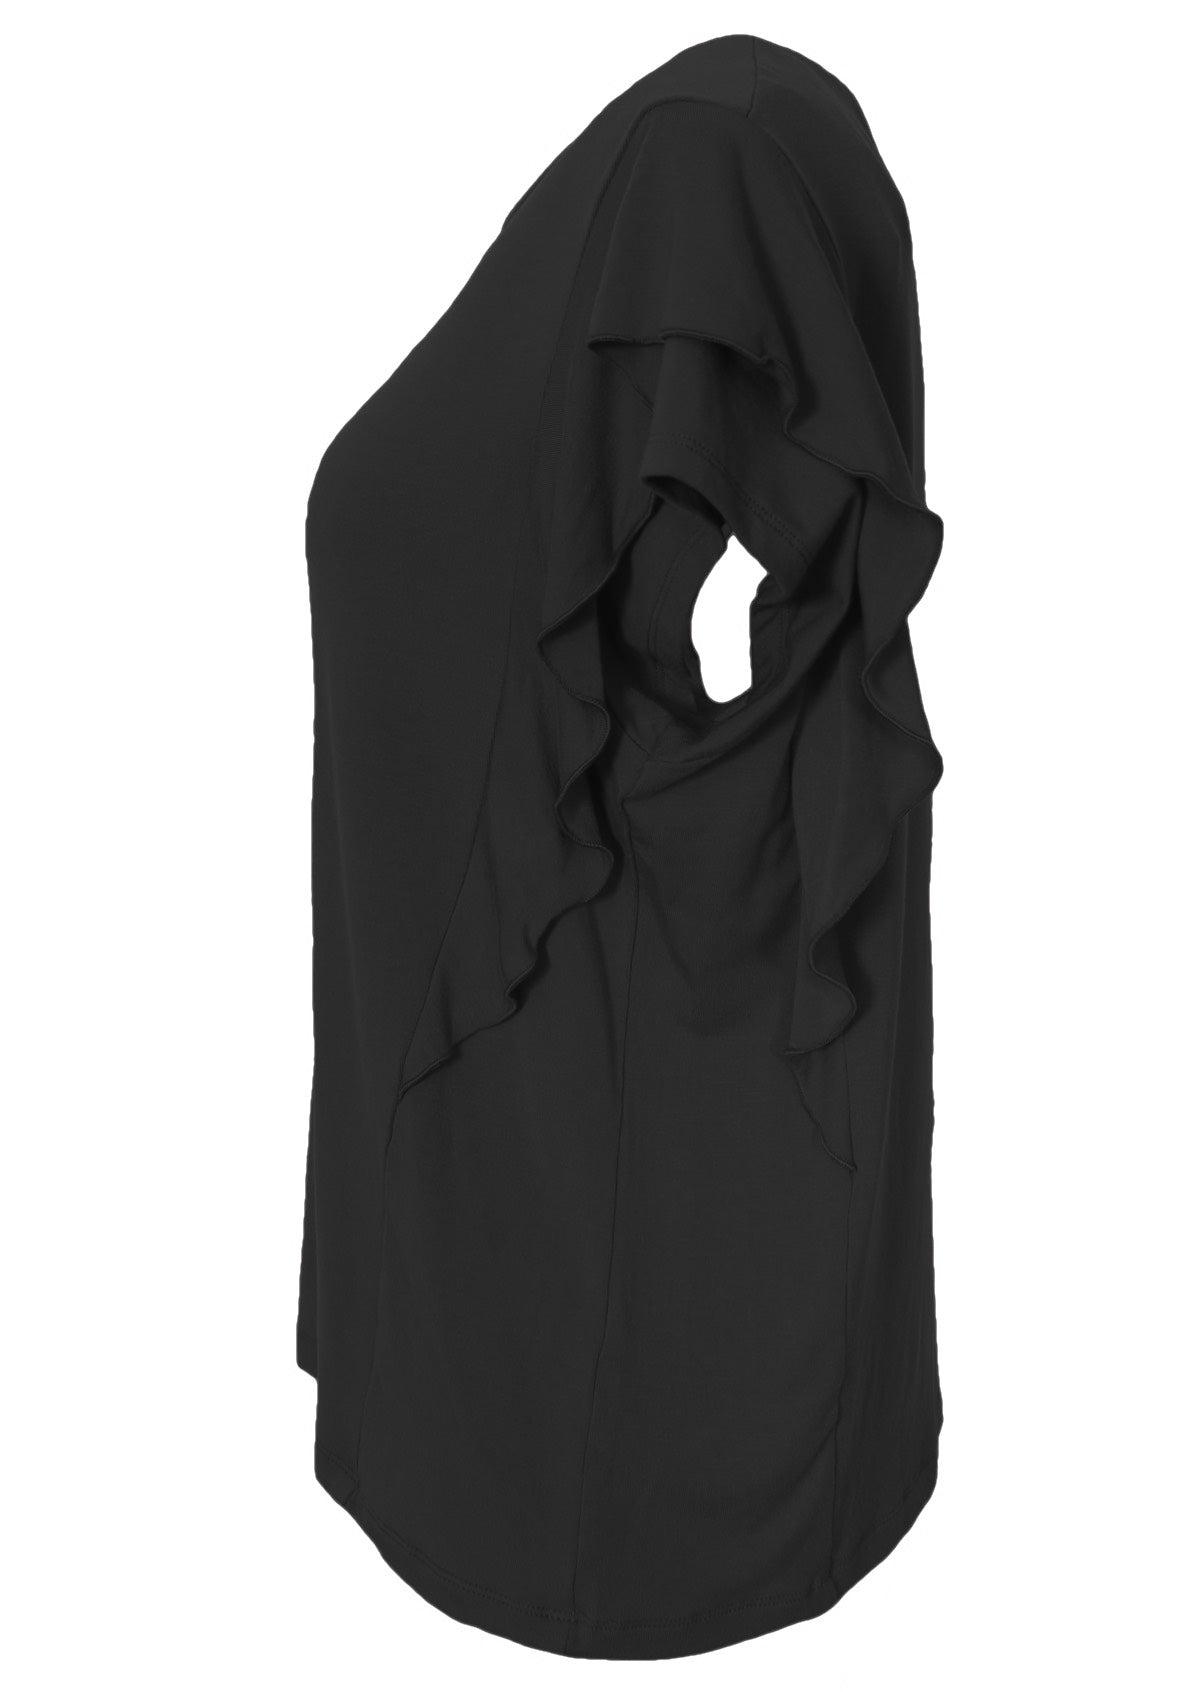 Side view cap sleeve black ruffle detail top over white background.